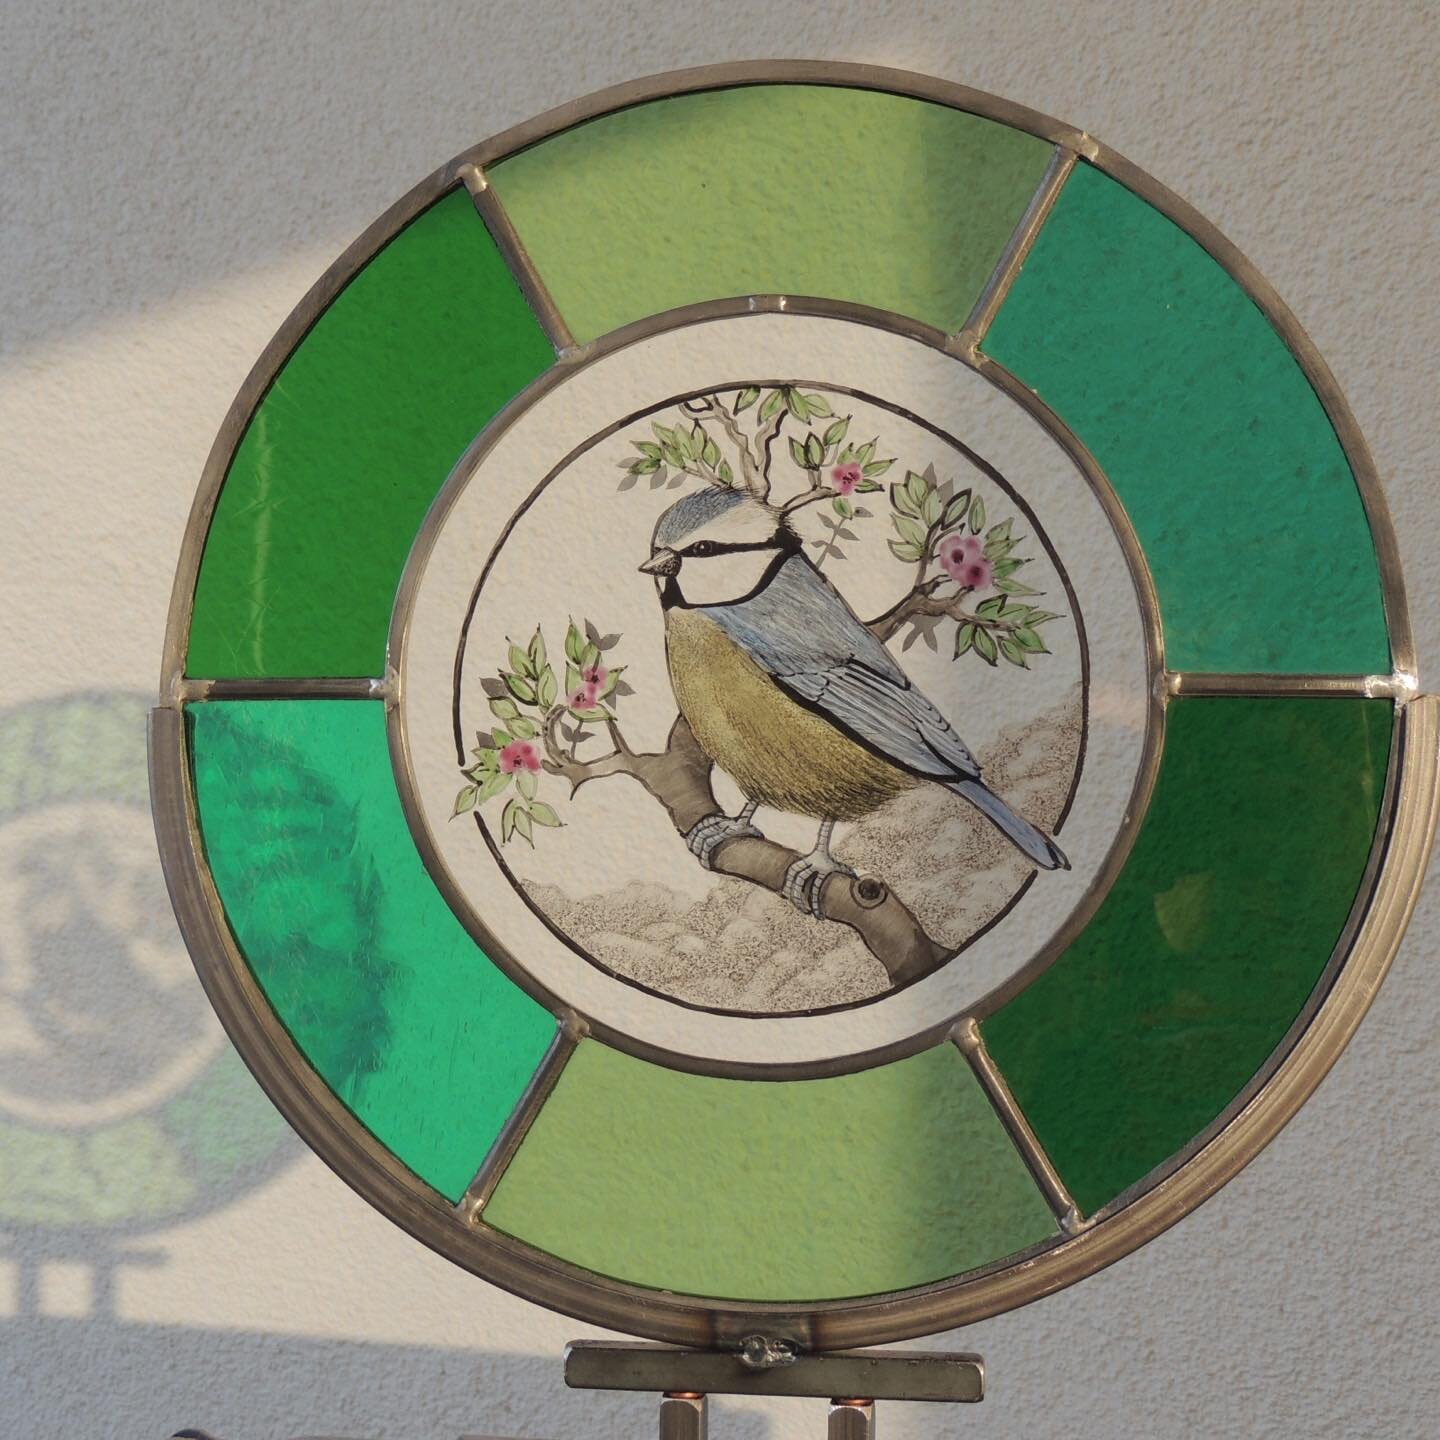 Another little bird! I really like how the flowers turned out 😁
#stainedglass #roundel #gardenbirds #birds #bluetit #britishwildlife #wildlife #uccelli #cincia #cinciarella #handpainted #VetrateArtistiche #glass #traditionalstainedglass #stainedglas